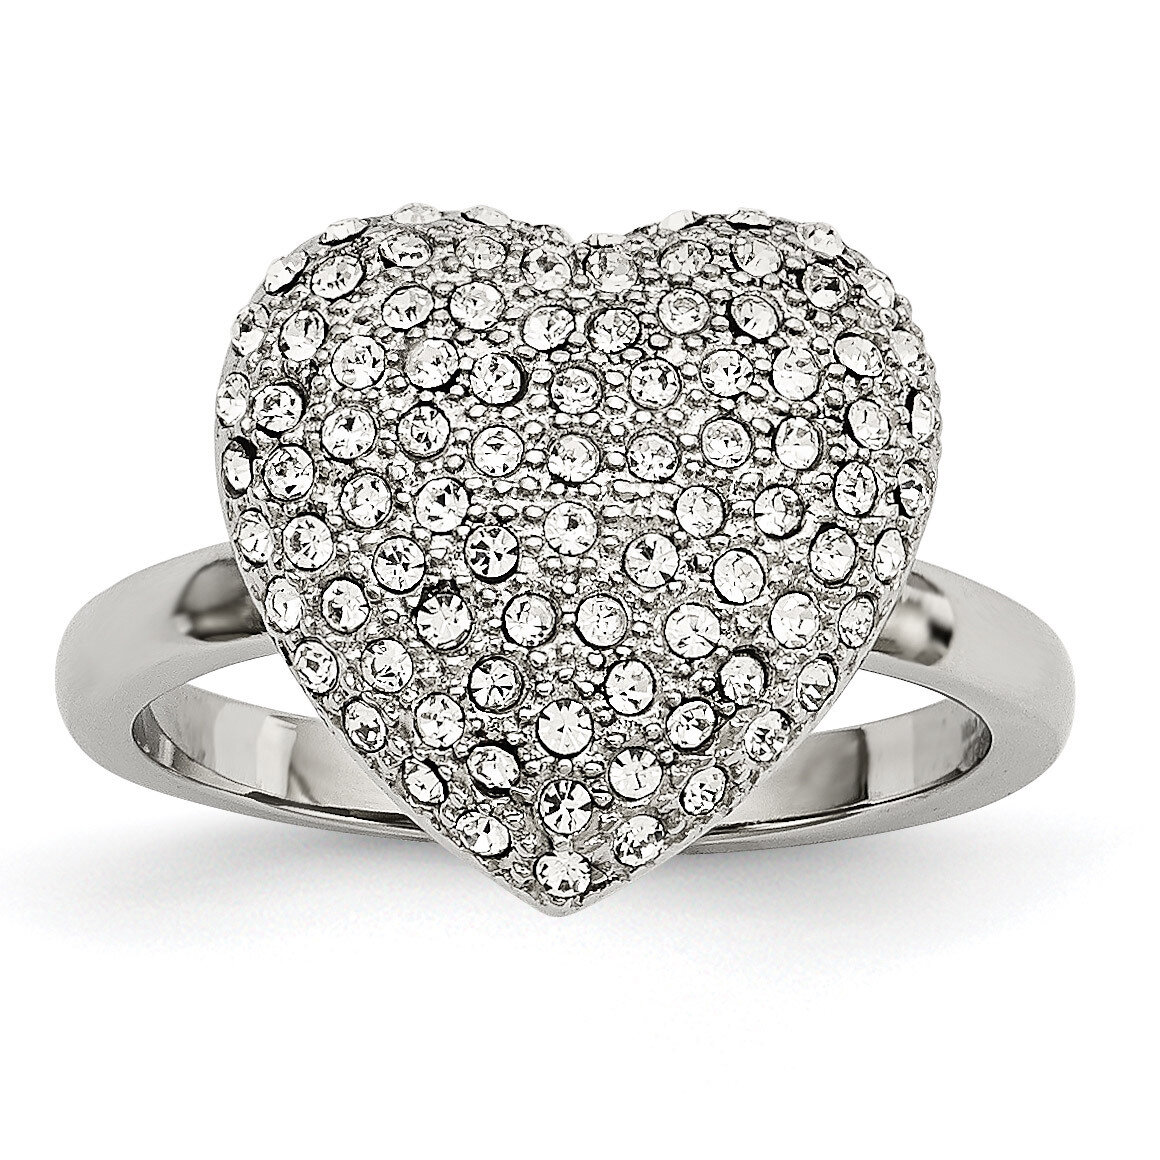 Preciosa Crystal Heart Ring Stainless Steel Polished SR590